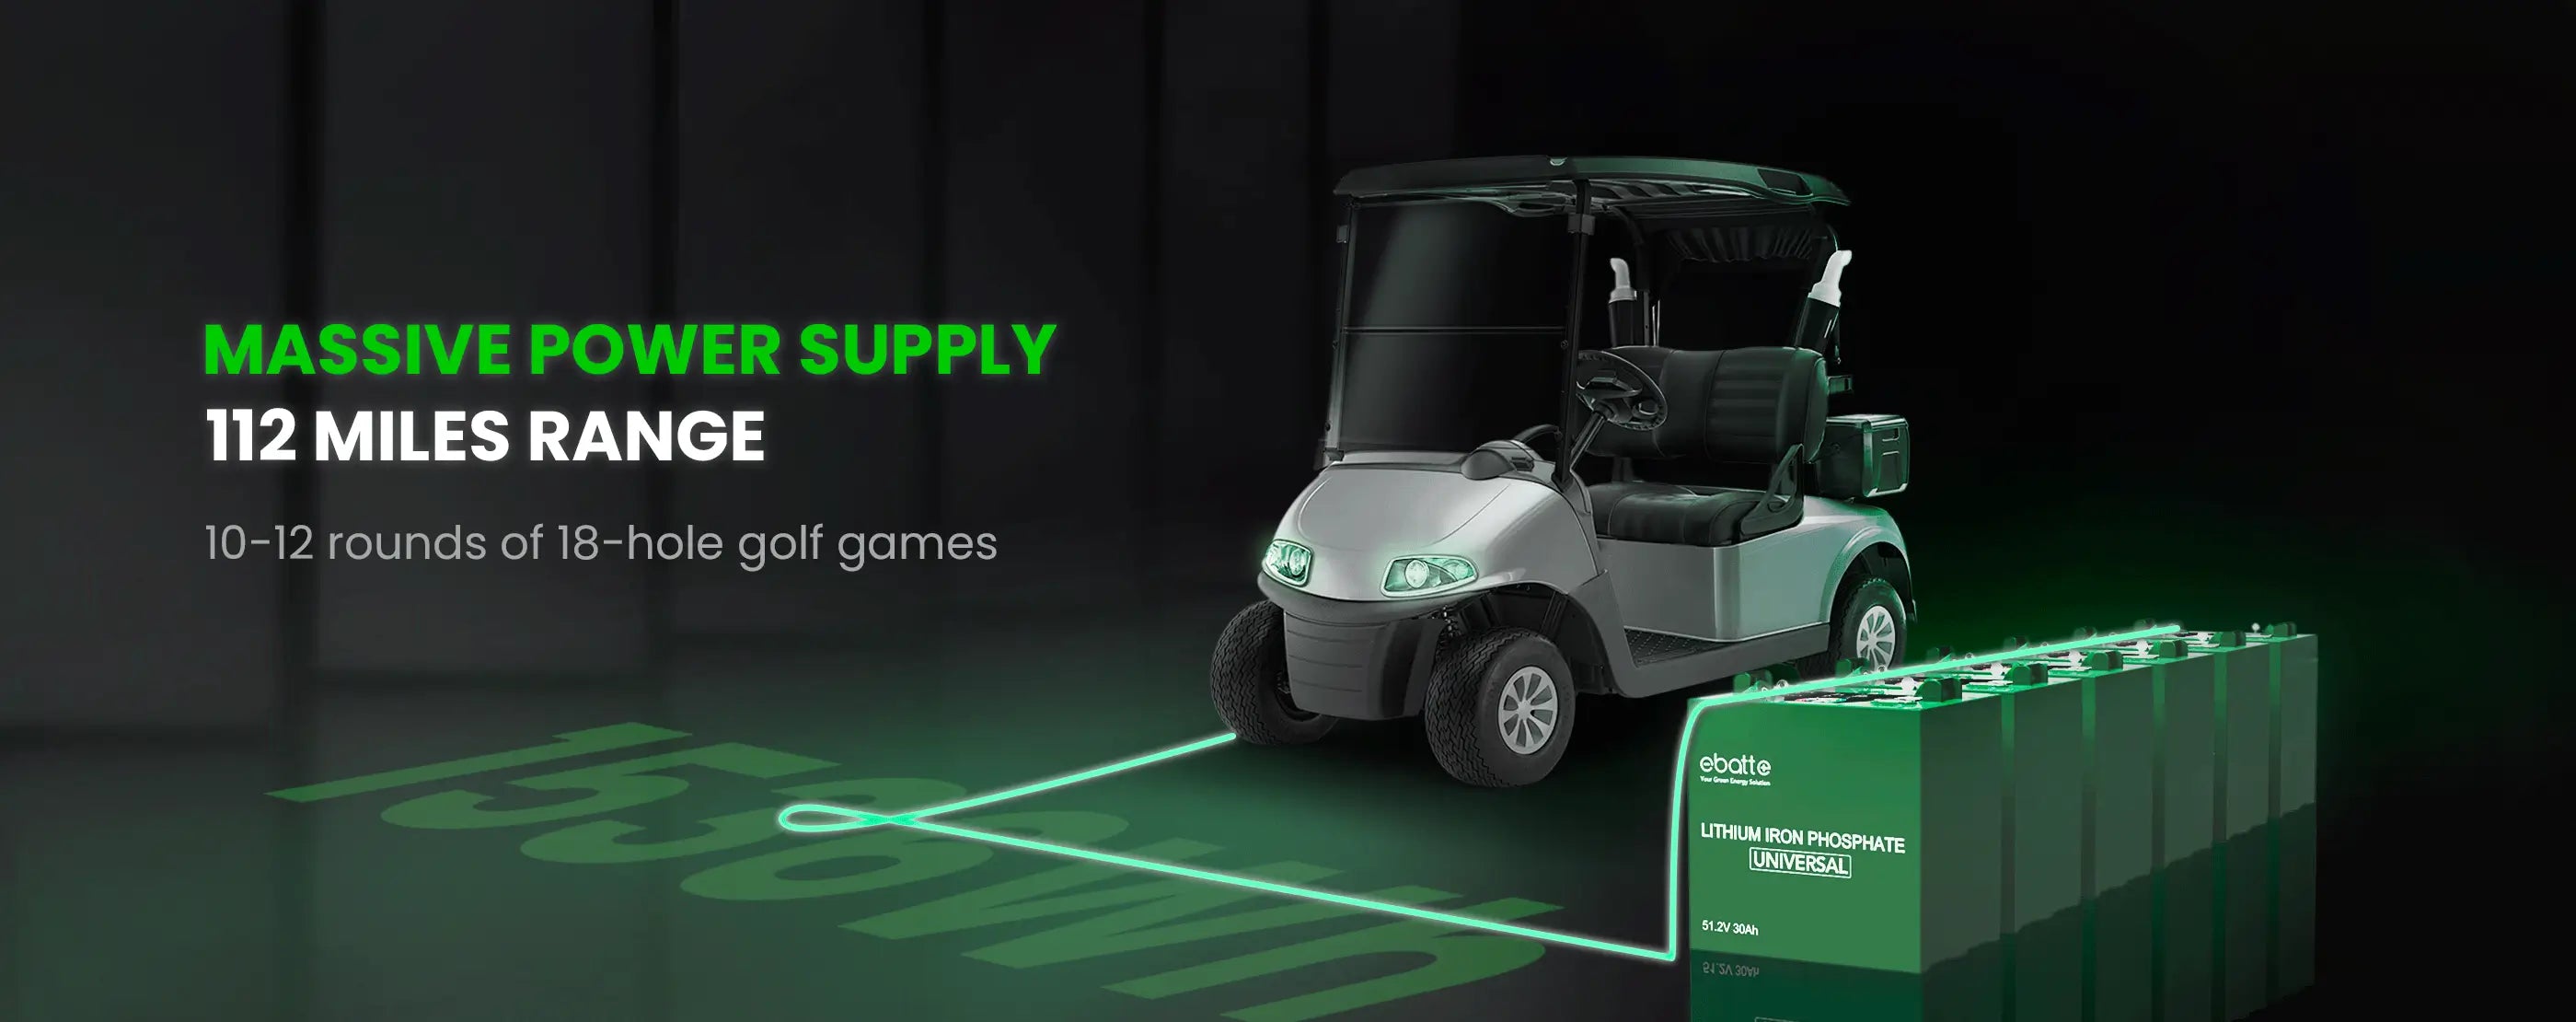 Enjoy Exhilarating Golfing Experience With Unlimited Power Supply